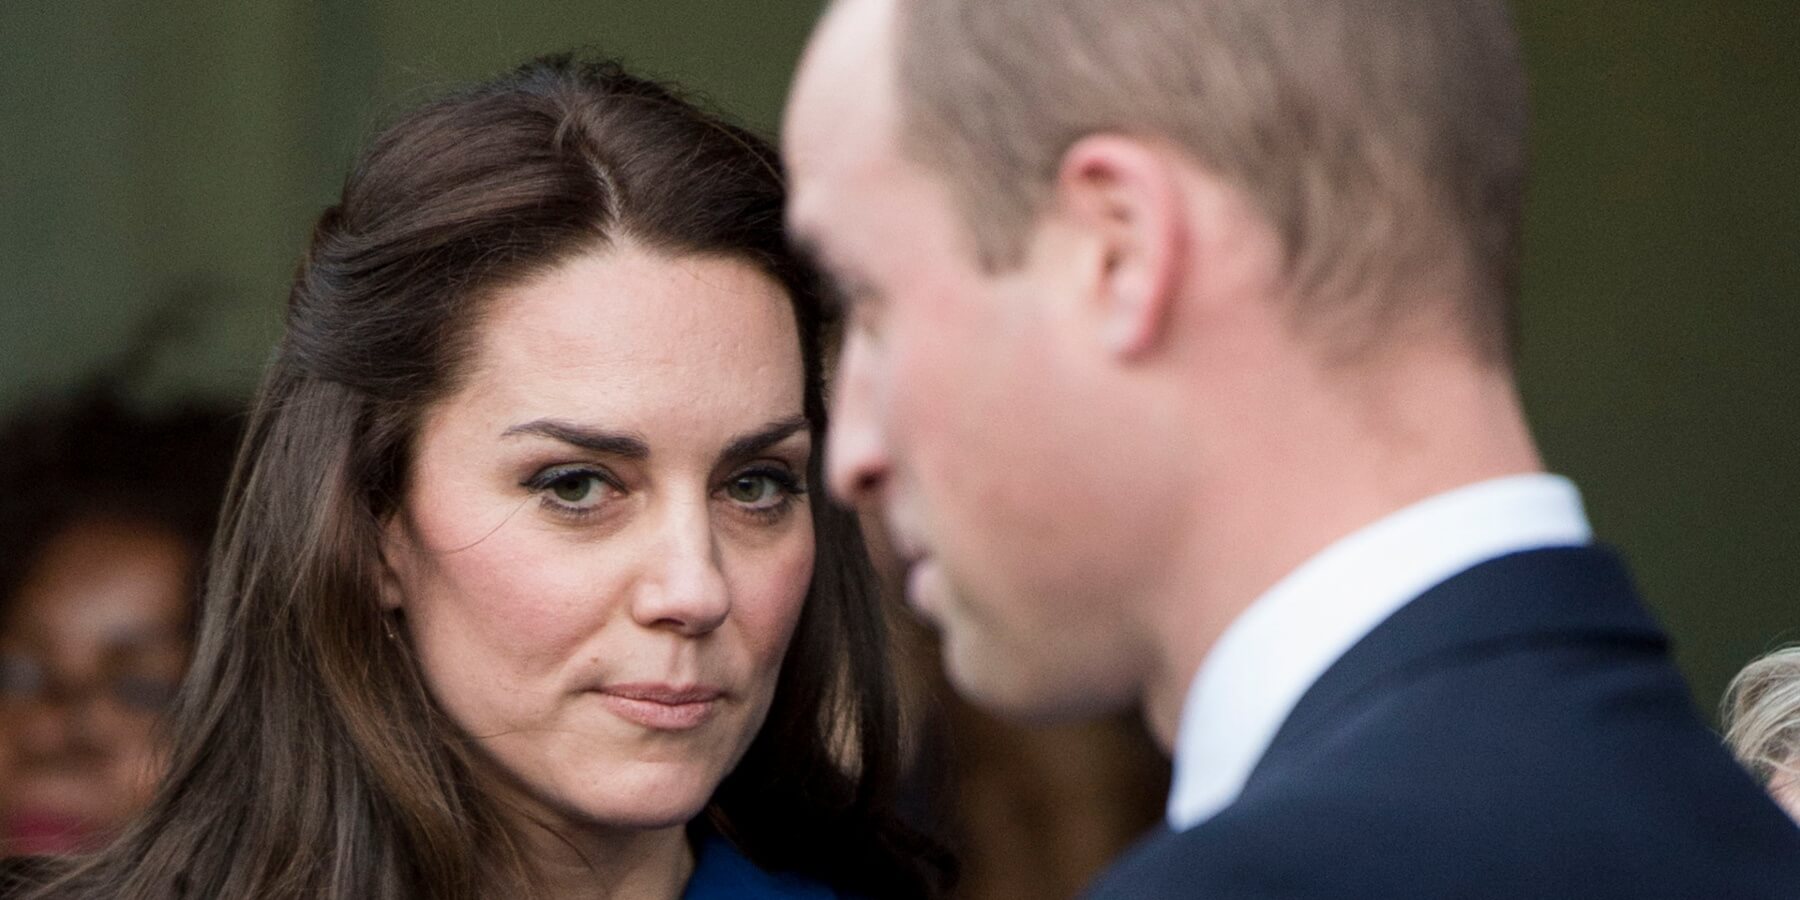 Kate Middleton and Prince William are feeling the weight of the monarchy says a royal correspondent